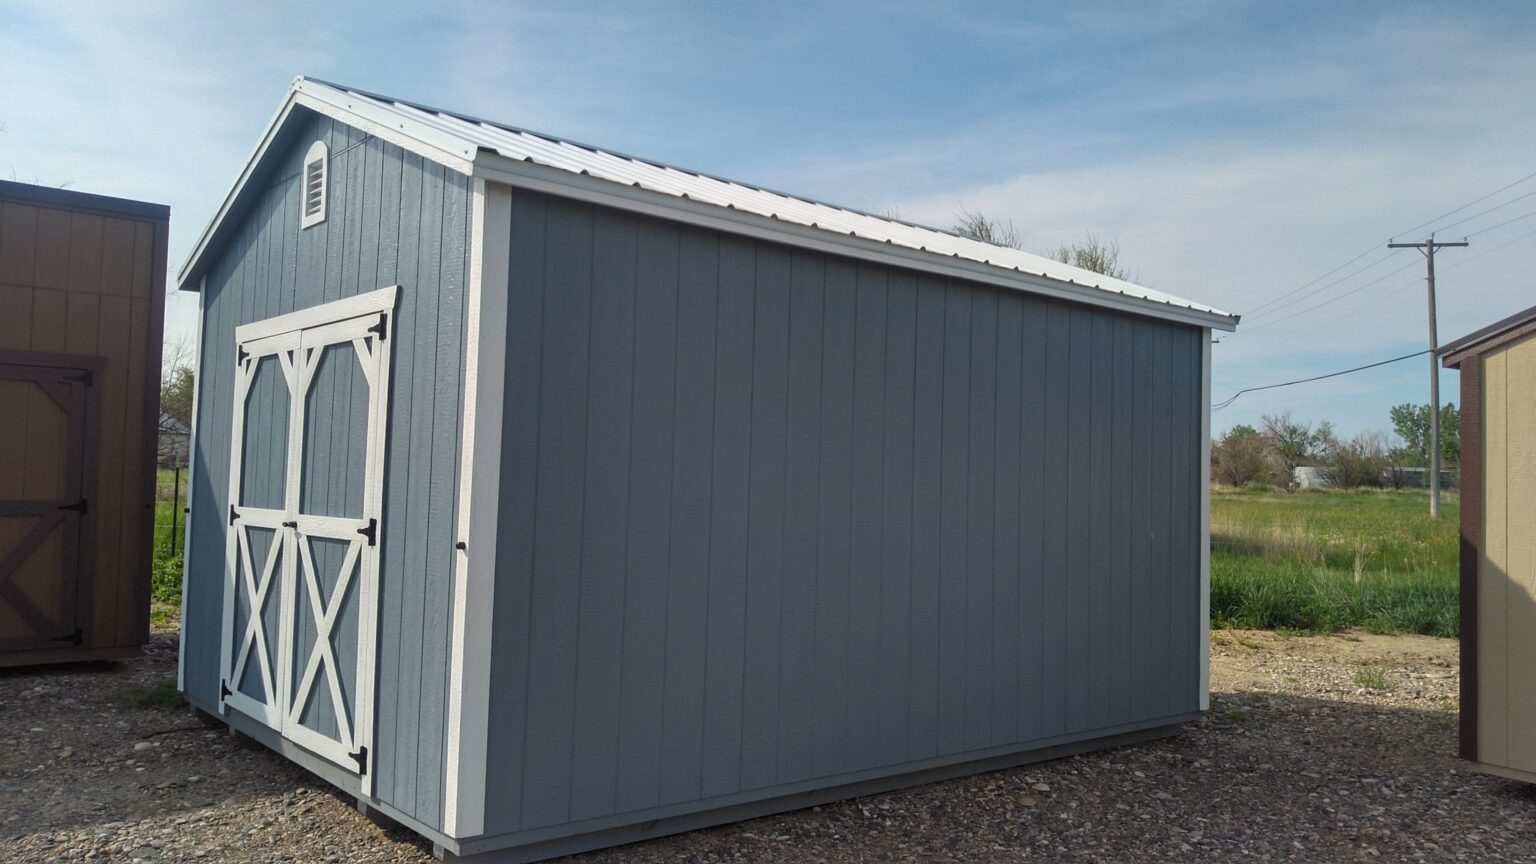 Light gray and white 12x16 garden shed.